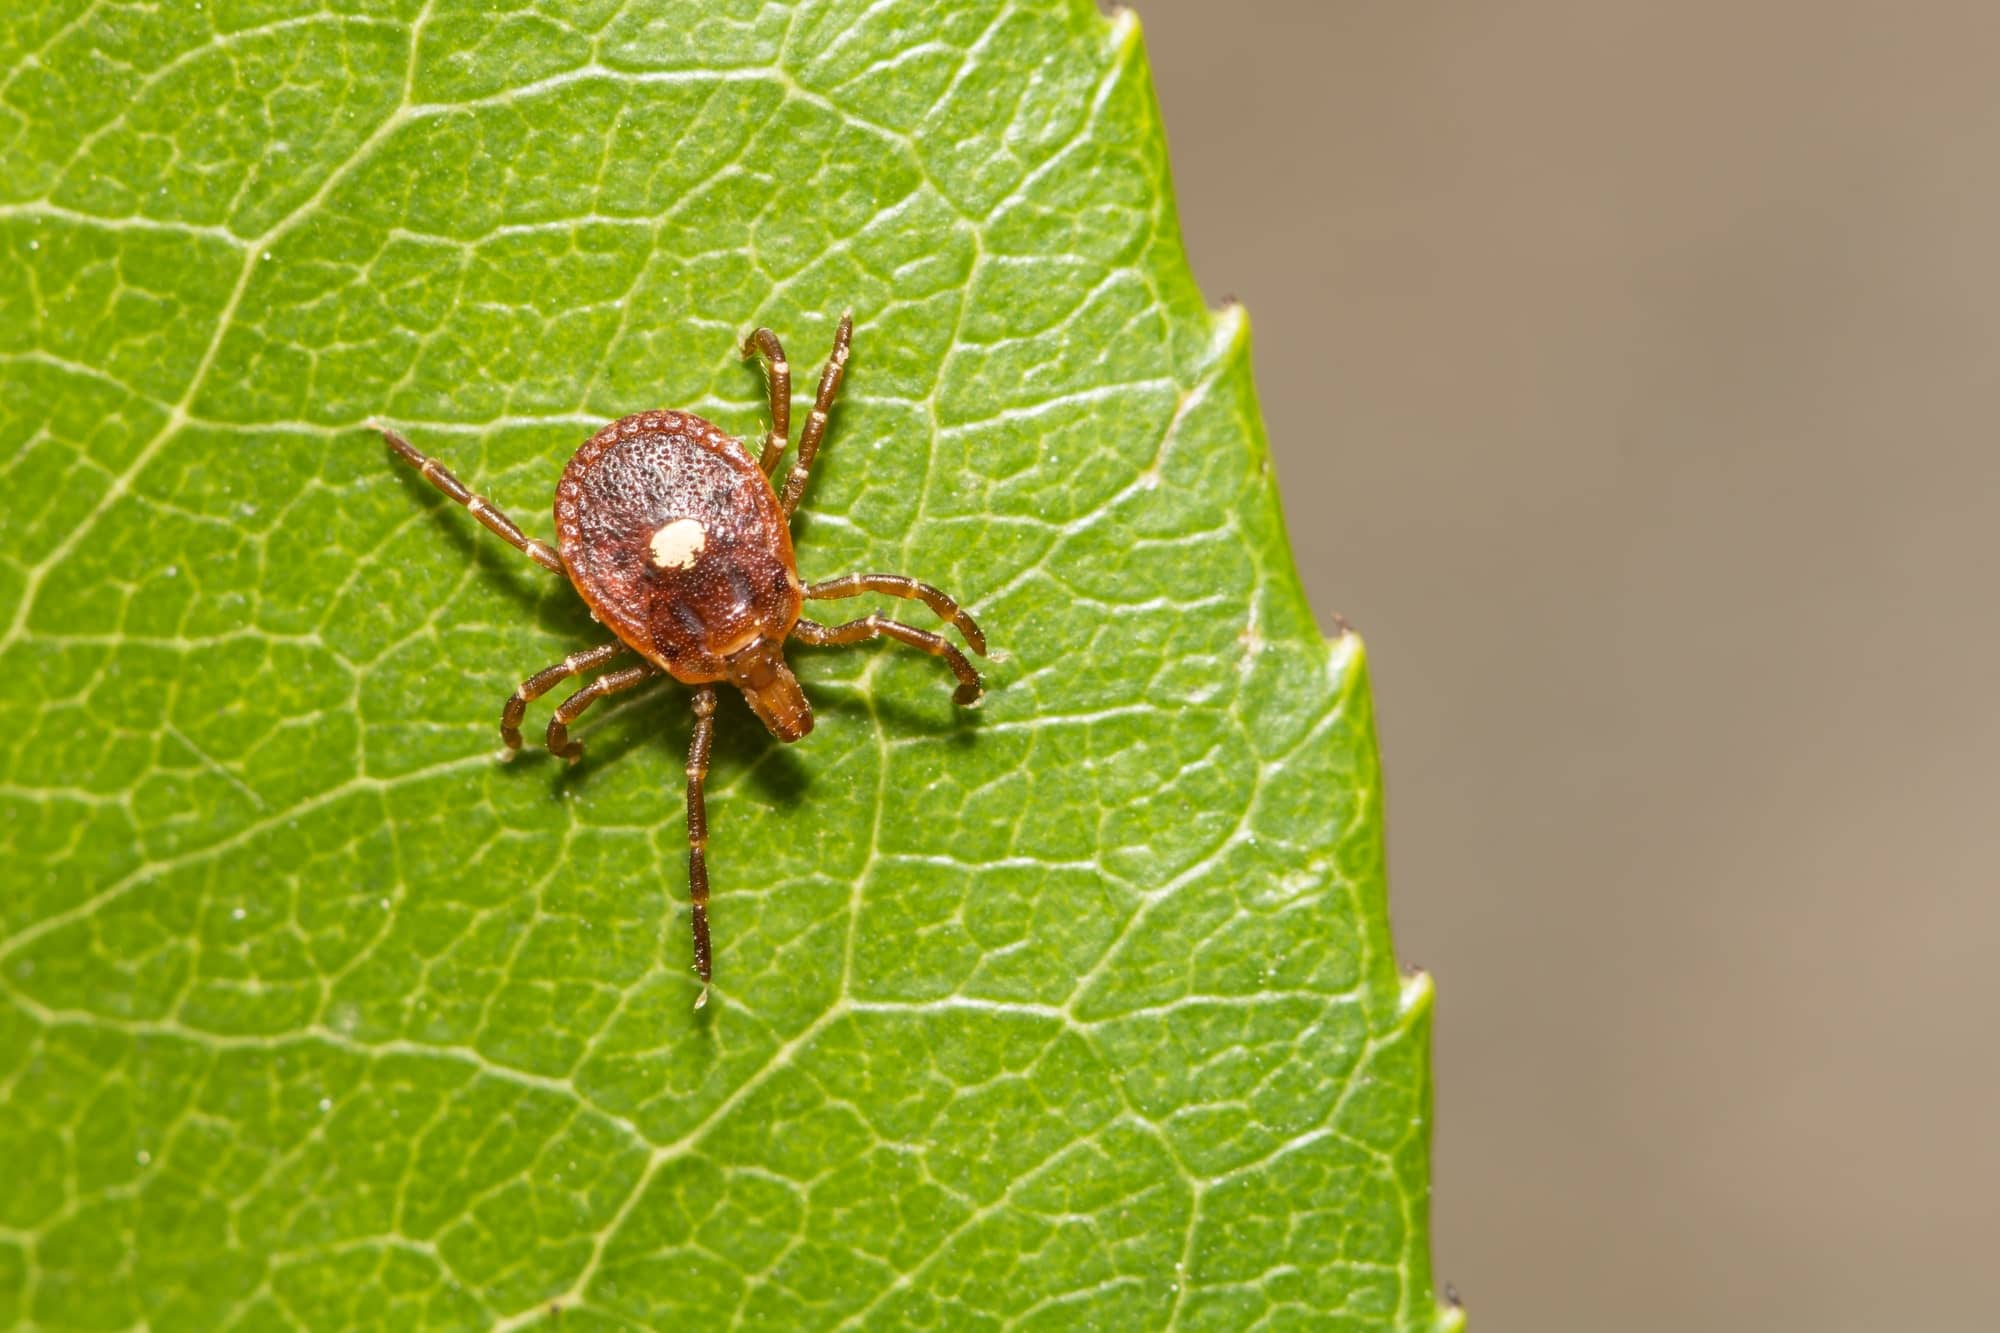 this tick can cause red meat allergy